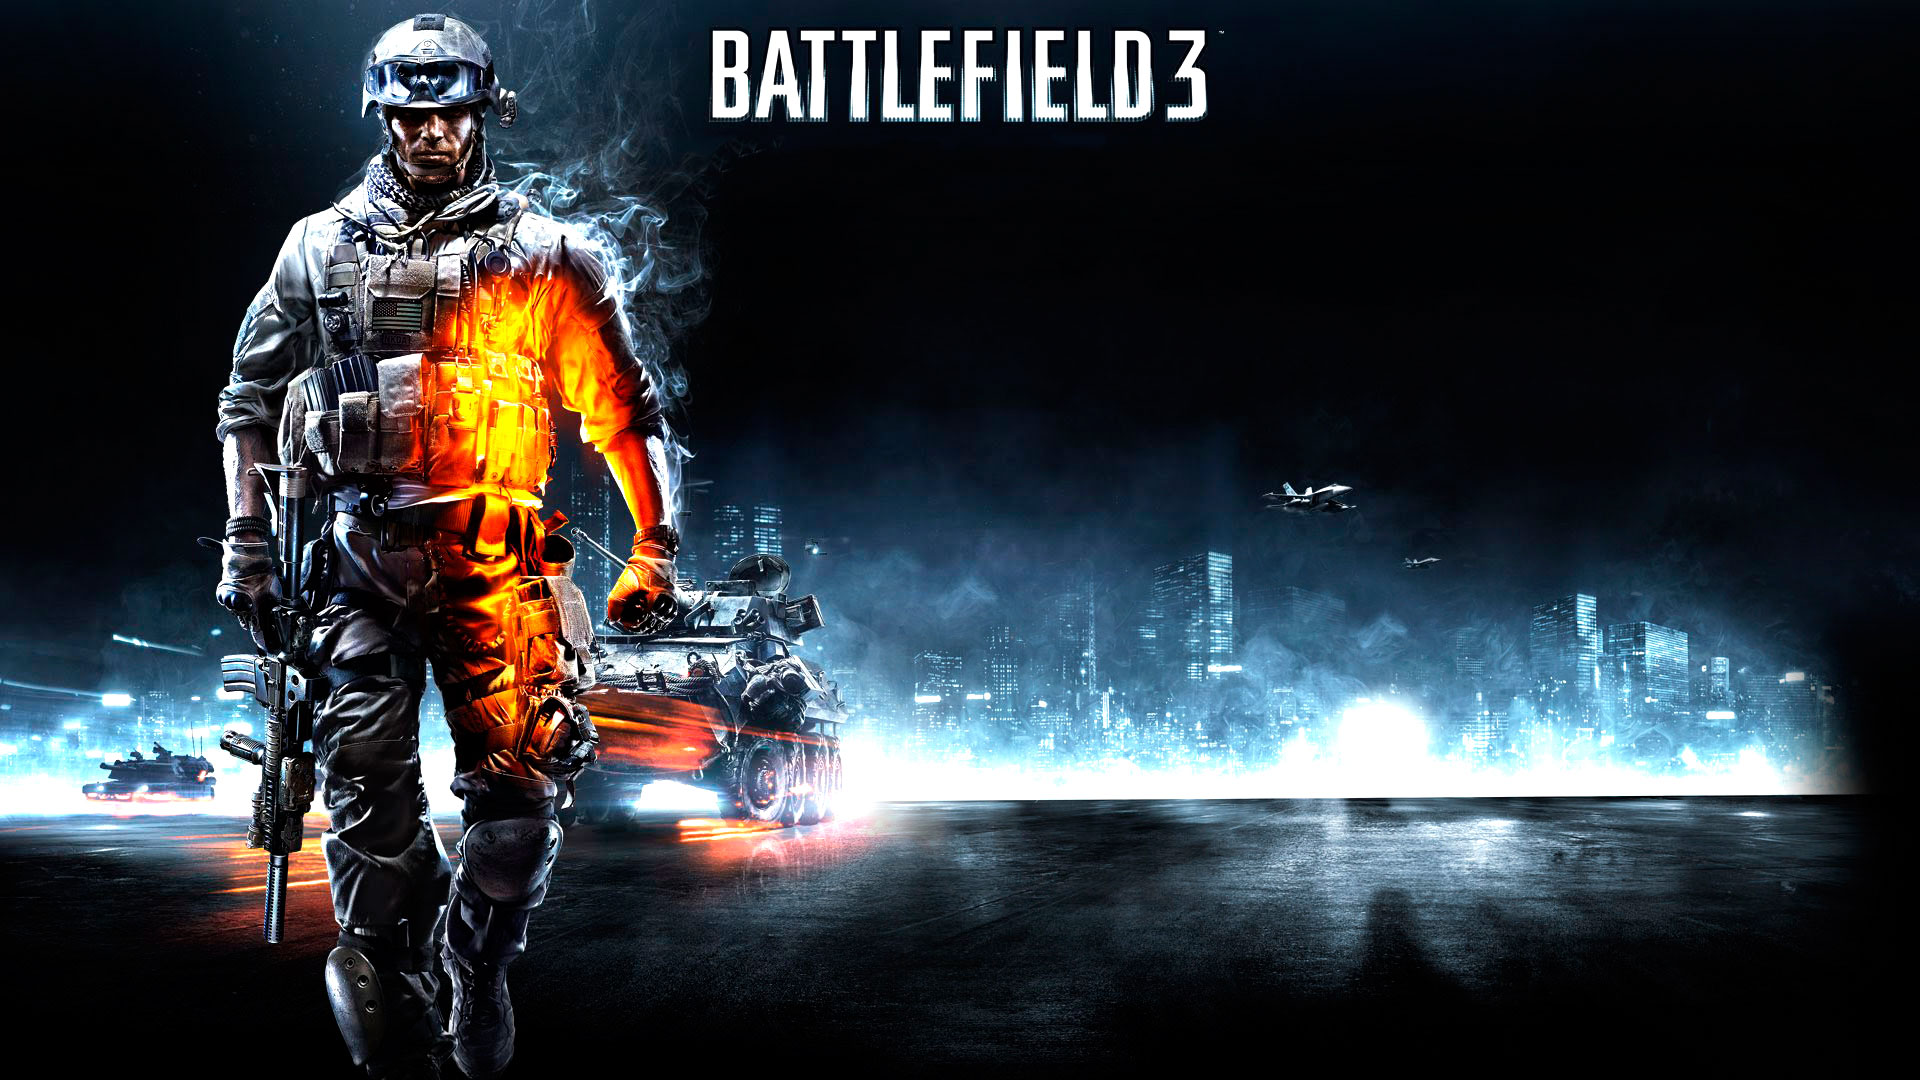 Battlefield Wallpaper Are Available For 1080p HD And 720p